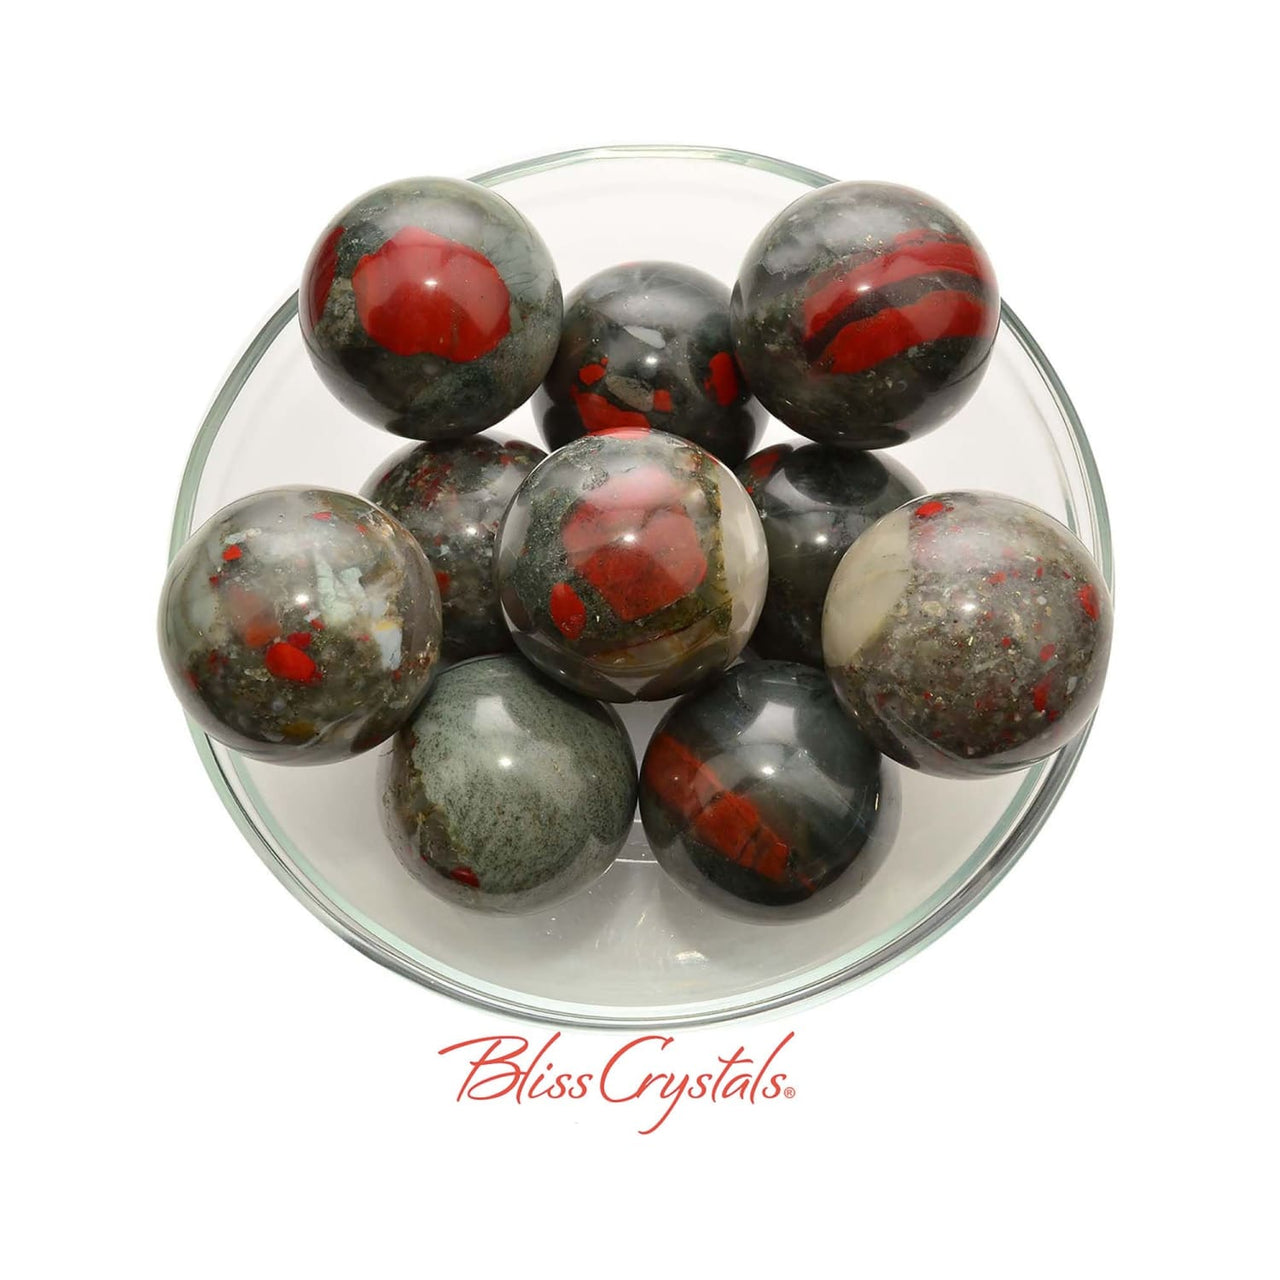 1 African Bloodstone Sphere + Stand Size Large #AB13